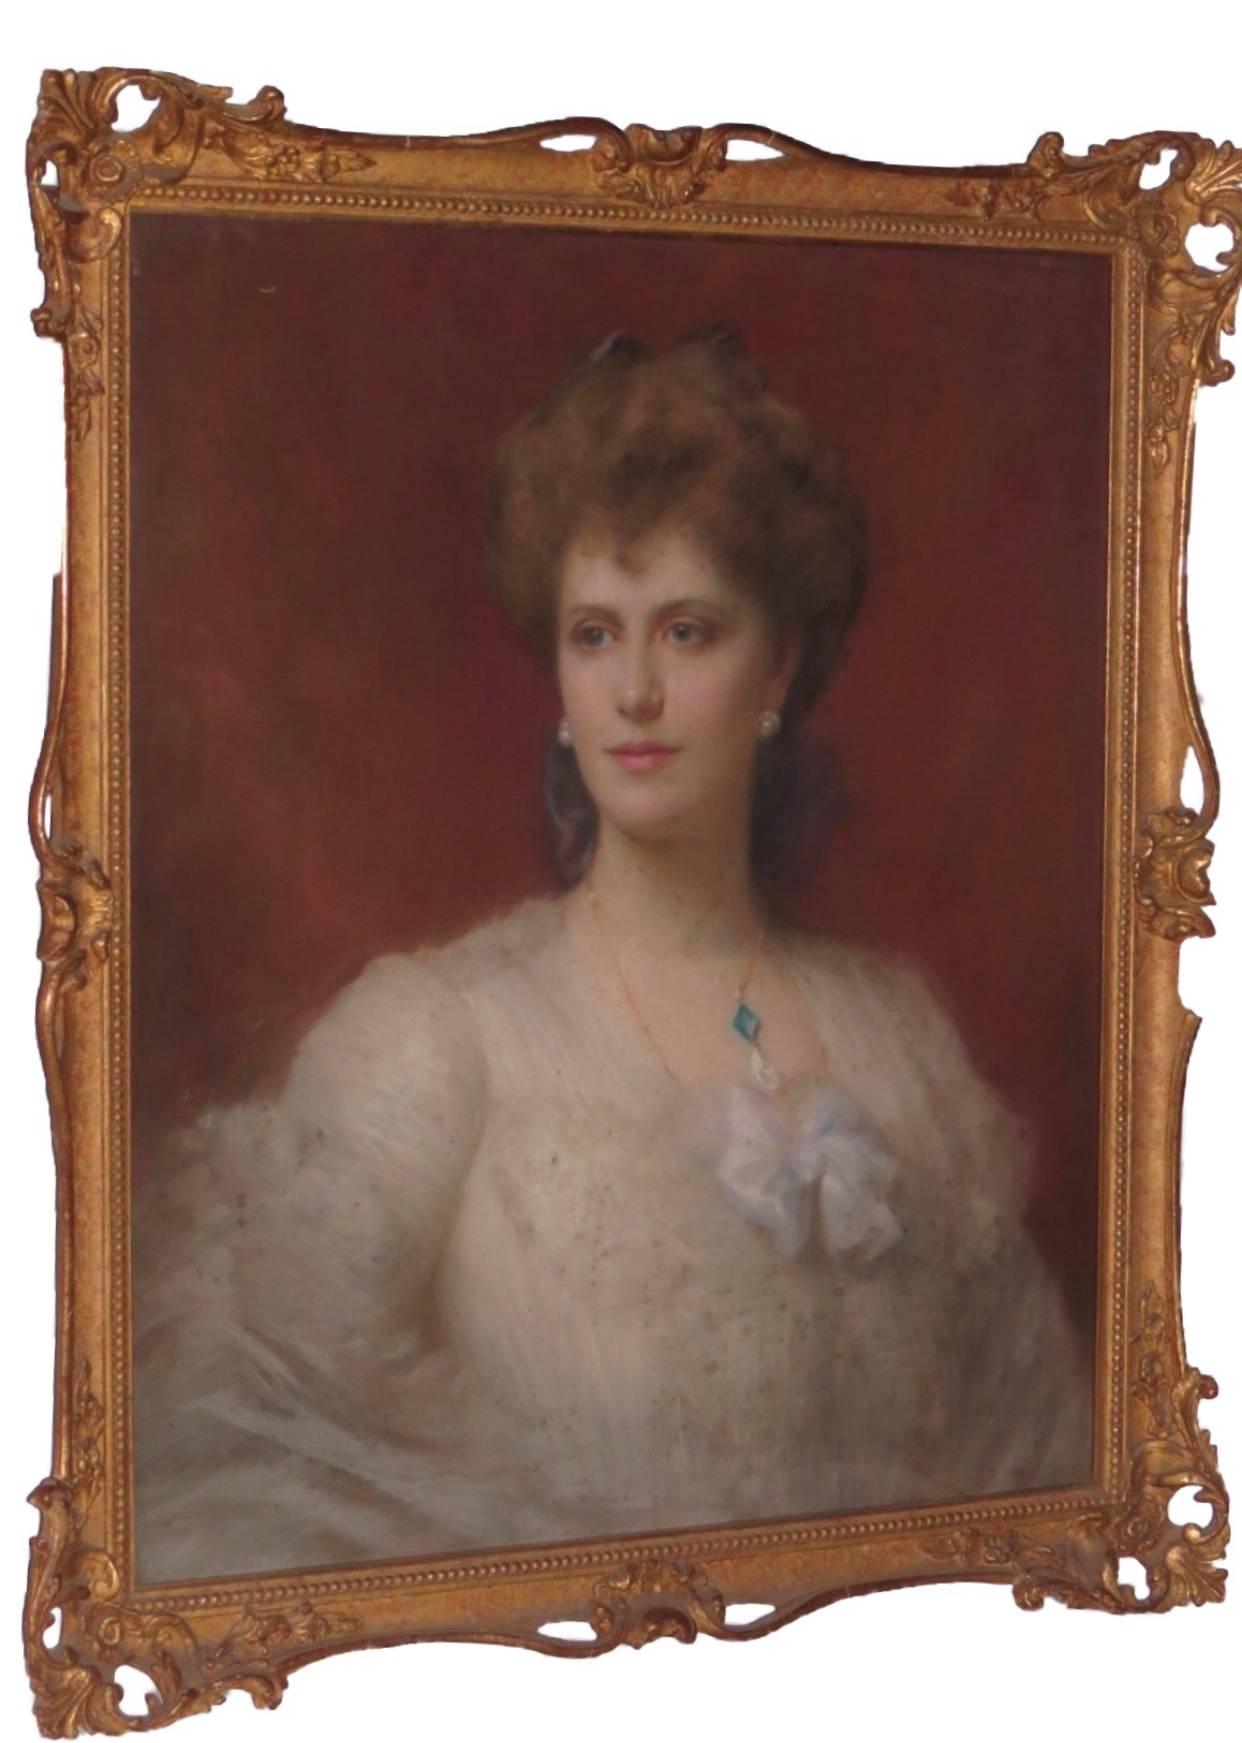 The Hon Mrs George Keppel by Ellis William Roberts (1860-1930)
Measures sight size: 75 cm x 61 cm.

Alice Keppel-
The favourite mistress of HRH King Edward VII, and the great grandmother of HRH the Duchess of Cornwall (formerly Camilla Parker